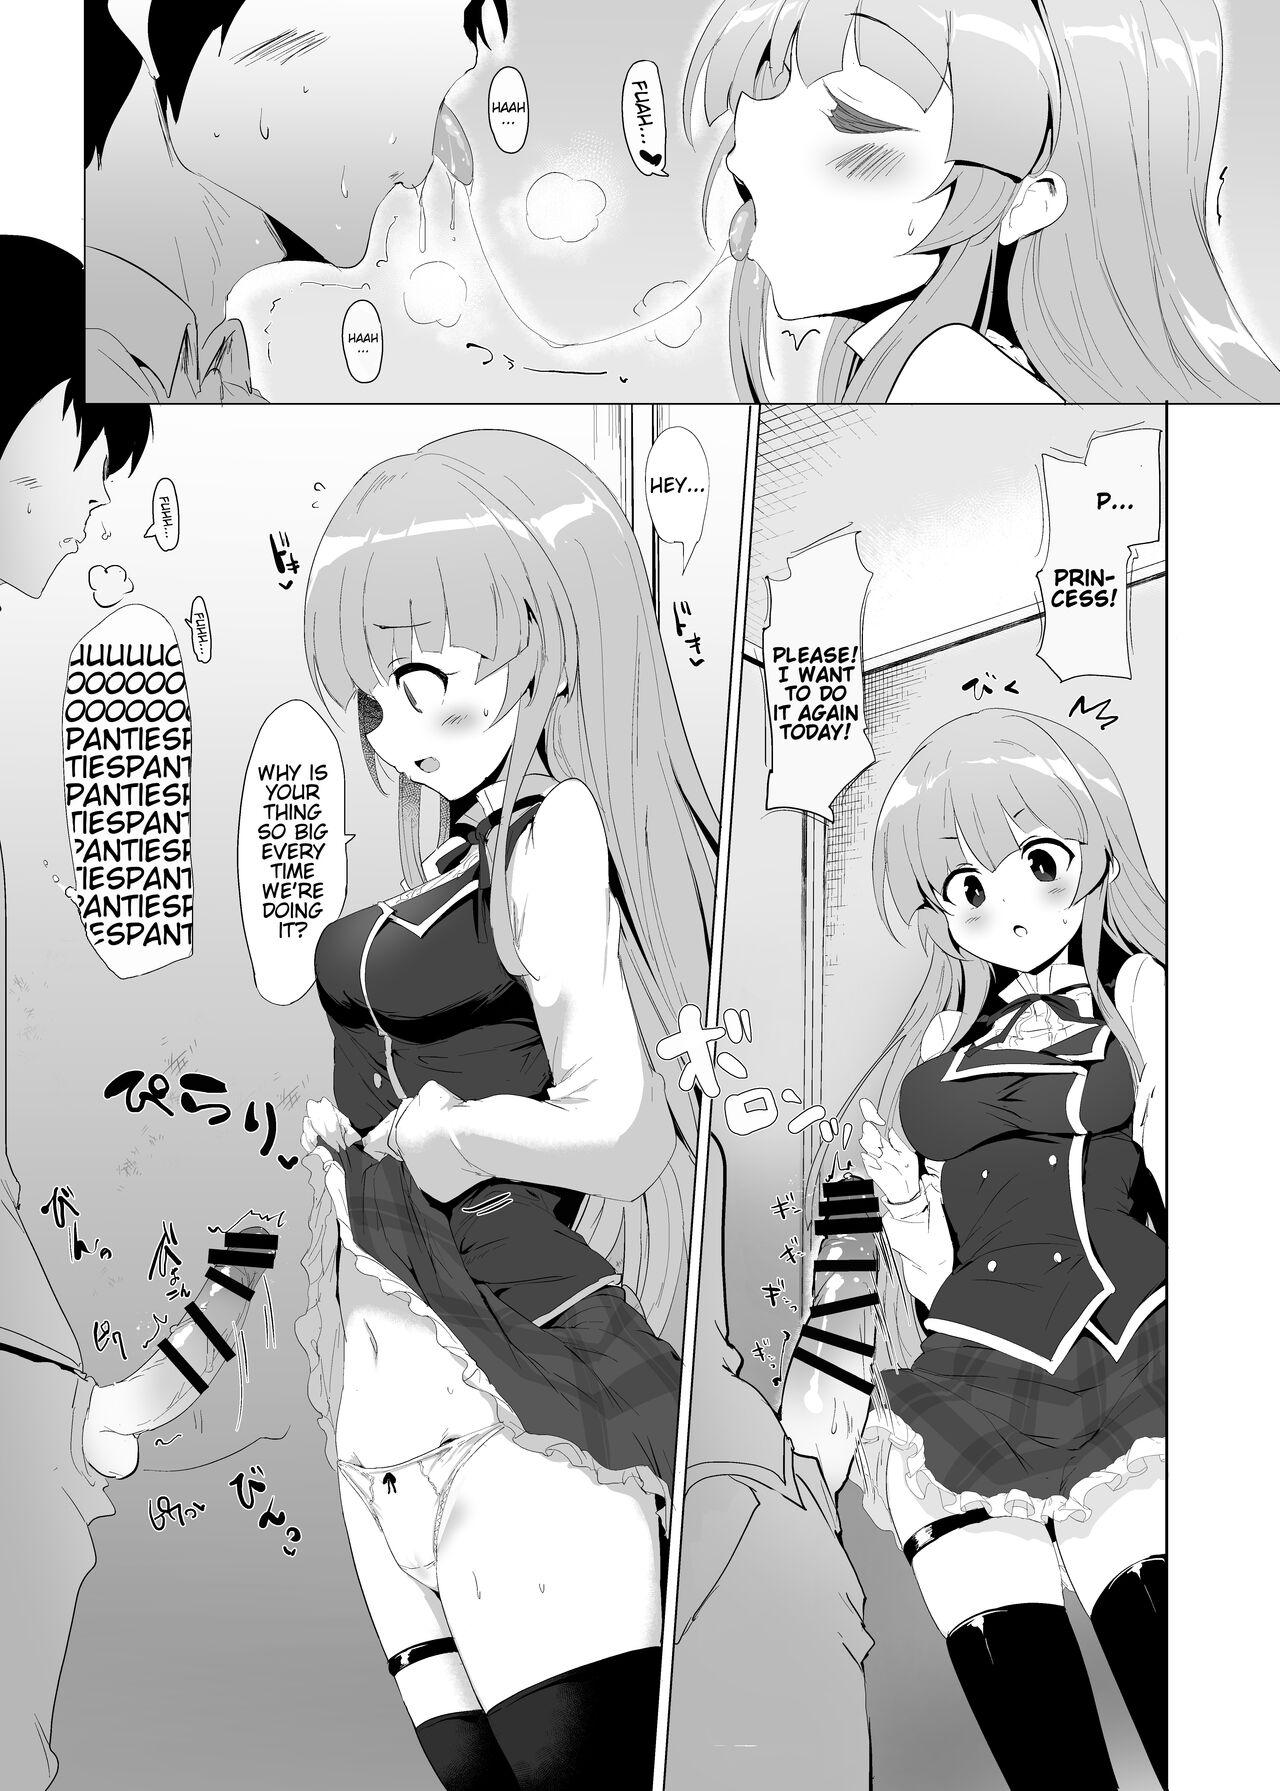 Real There's No Way An Ecchi Event Will Happen Between Me and the Princess of Manaria Kingdom! 2 - Manaria friends Hair - Page 7